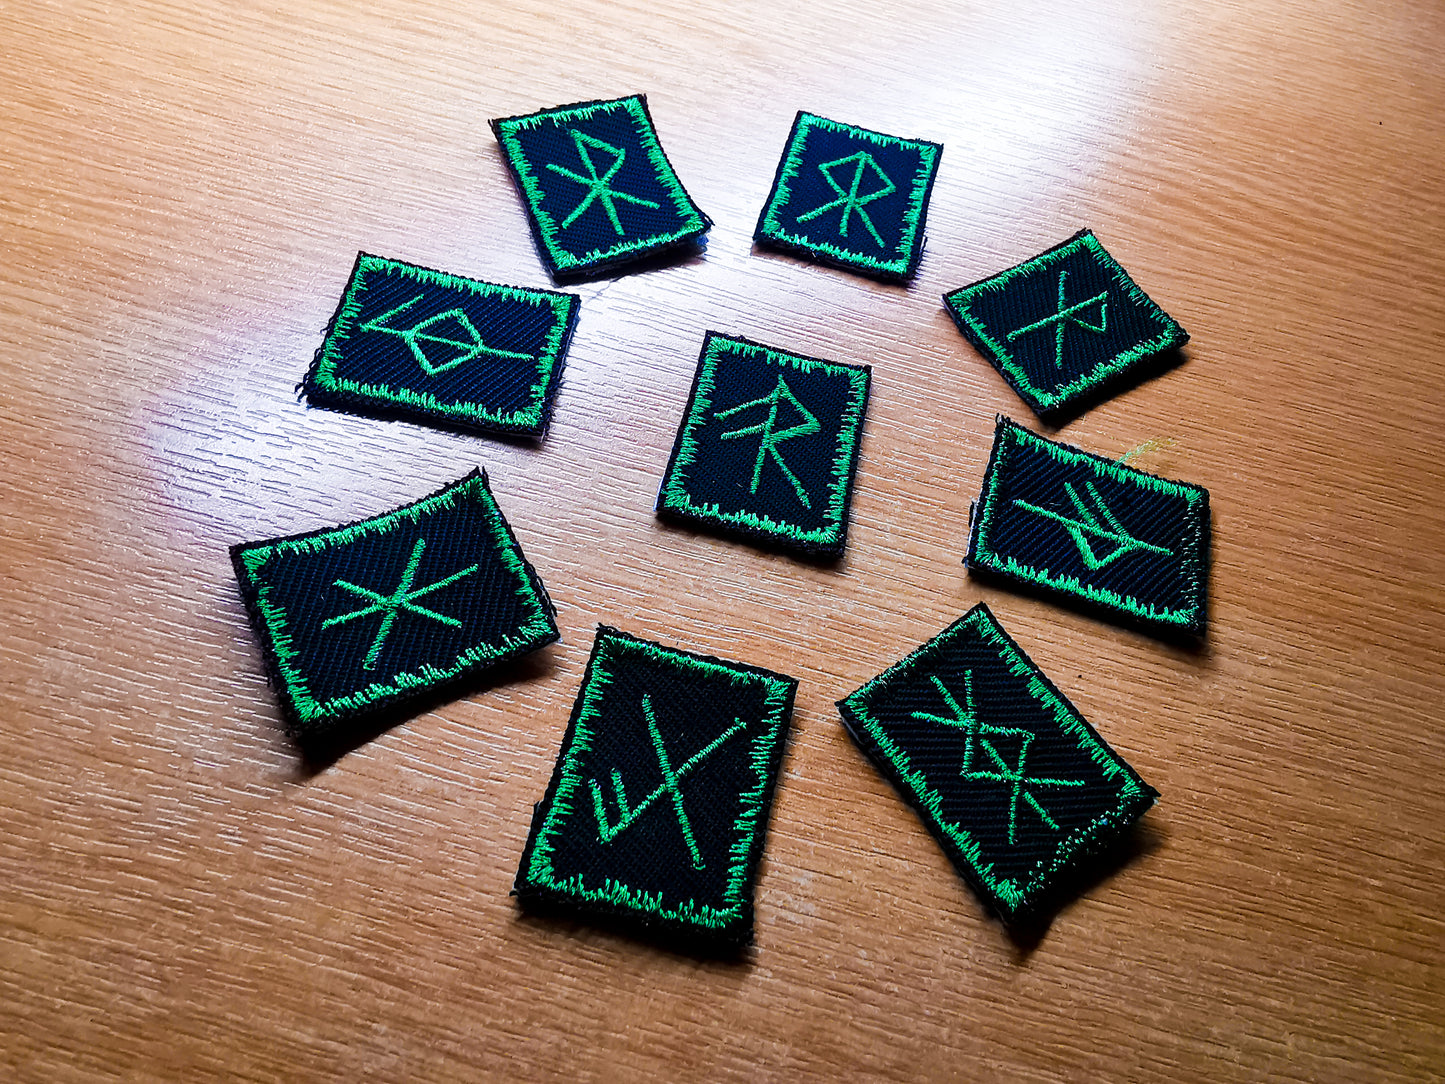 Jade Green Bindrune Patches Embroidered Viking Norse Heathenry Bind Runes